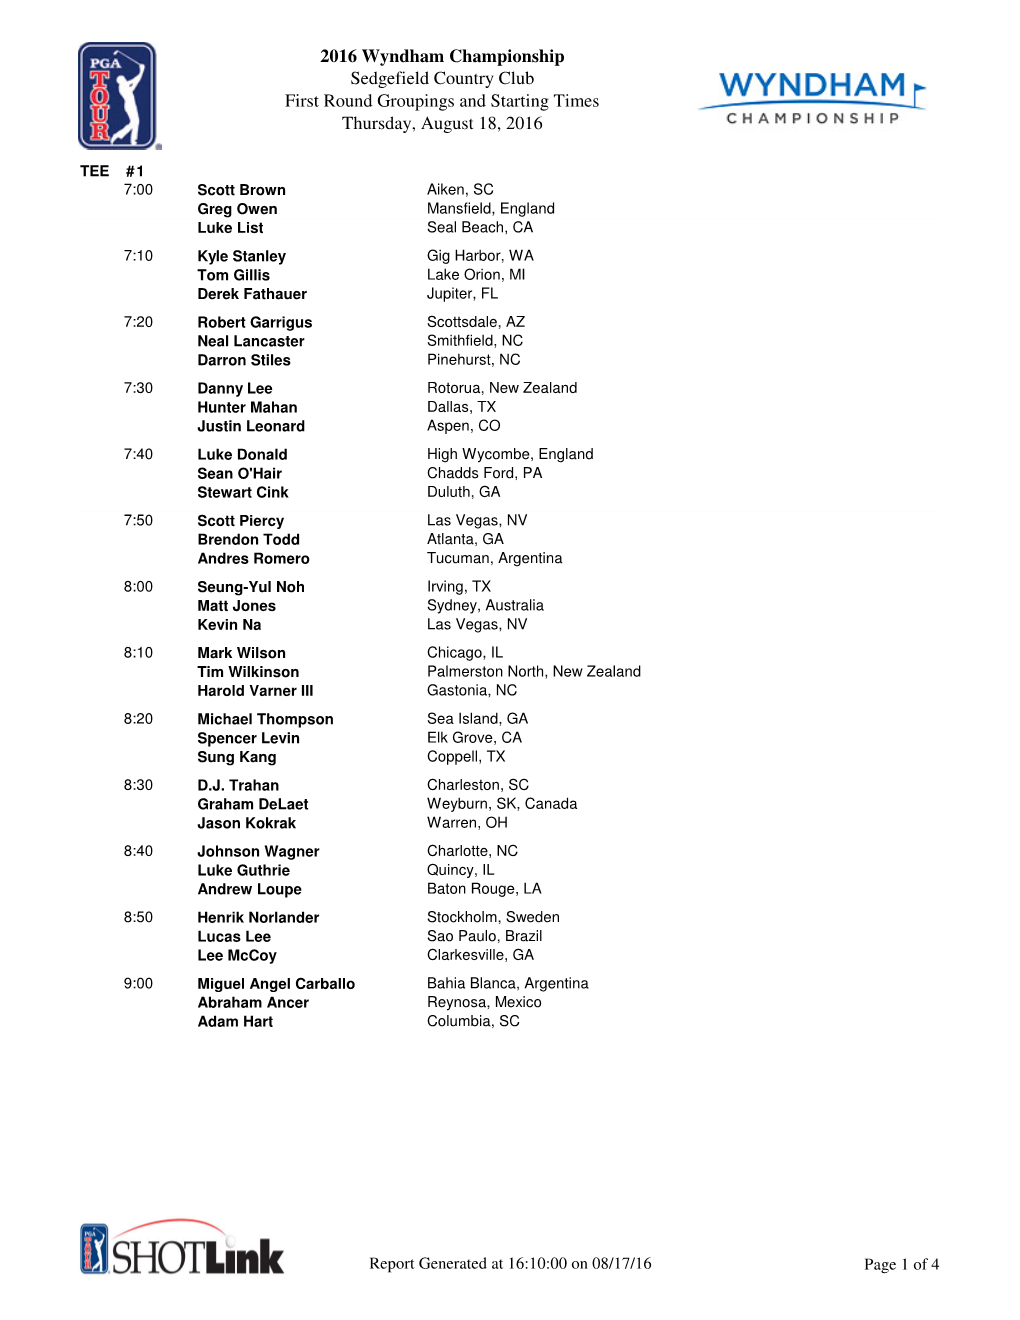 2016 Wyndham Championship Sedgefield Country Club First Round Groupings and Starting Times Thursday, August 18, 2016